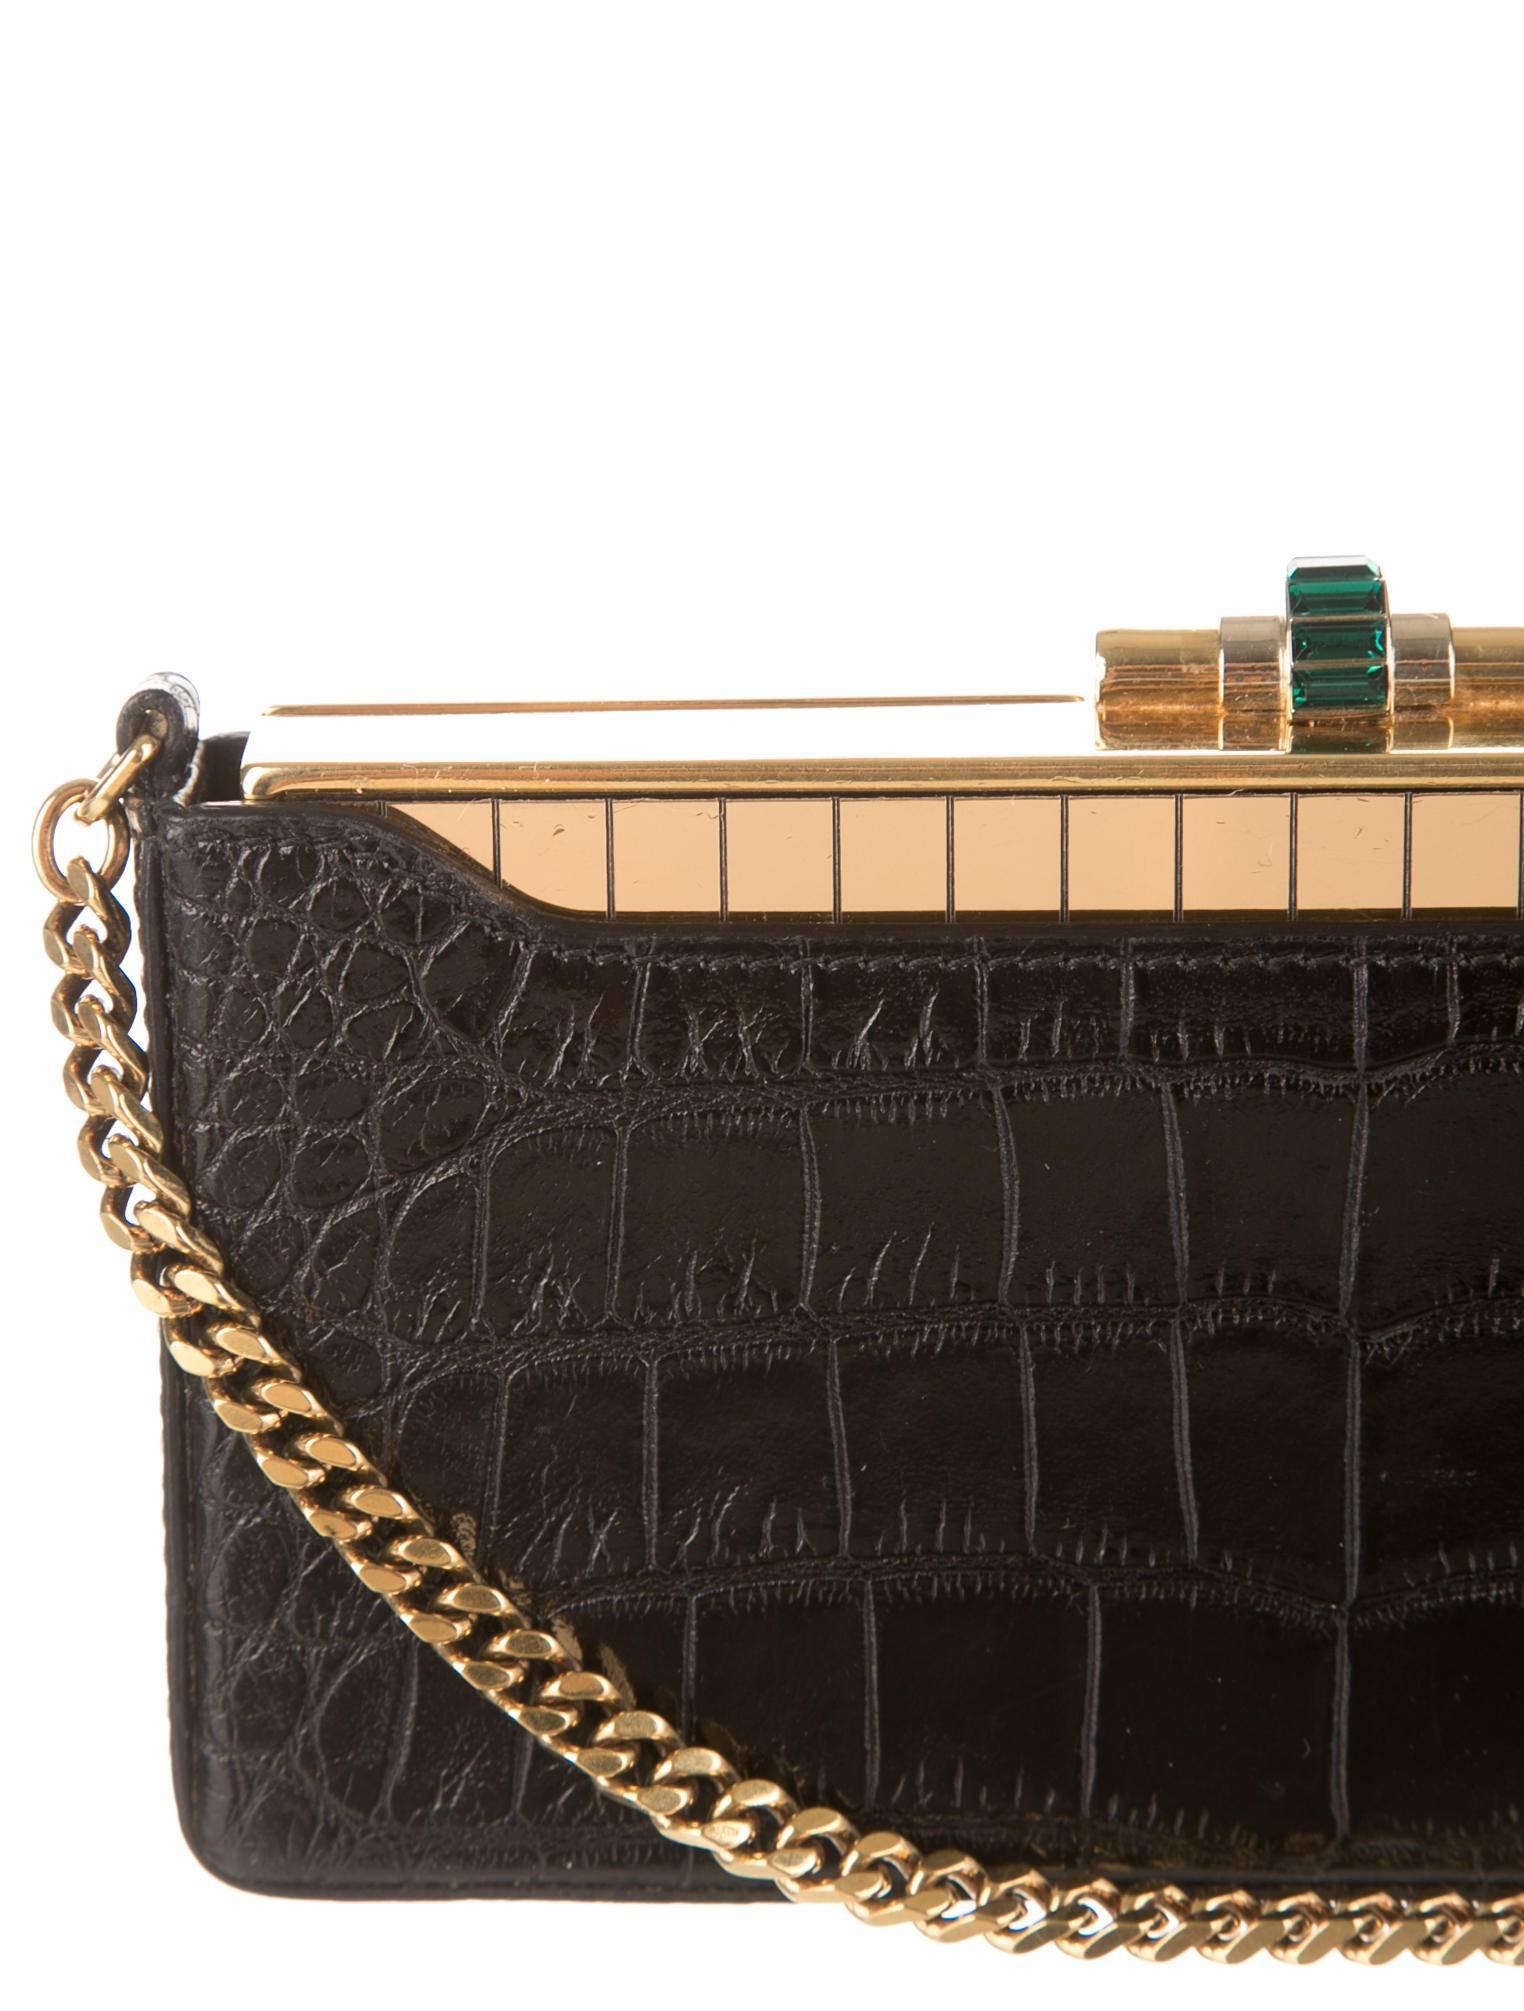 CURATOR'S NOTES

INCREDIBLE price reduction for a limited time only!

The mother of luxury evening bags!  Stunning Gucci crocodile and gold evening clutch shoulder bag.  Fit for a queen heavy on the social scene.

Retail Price